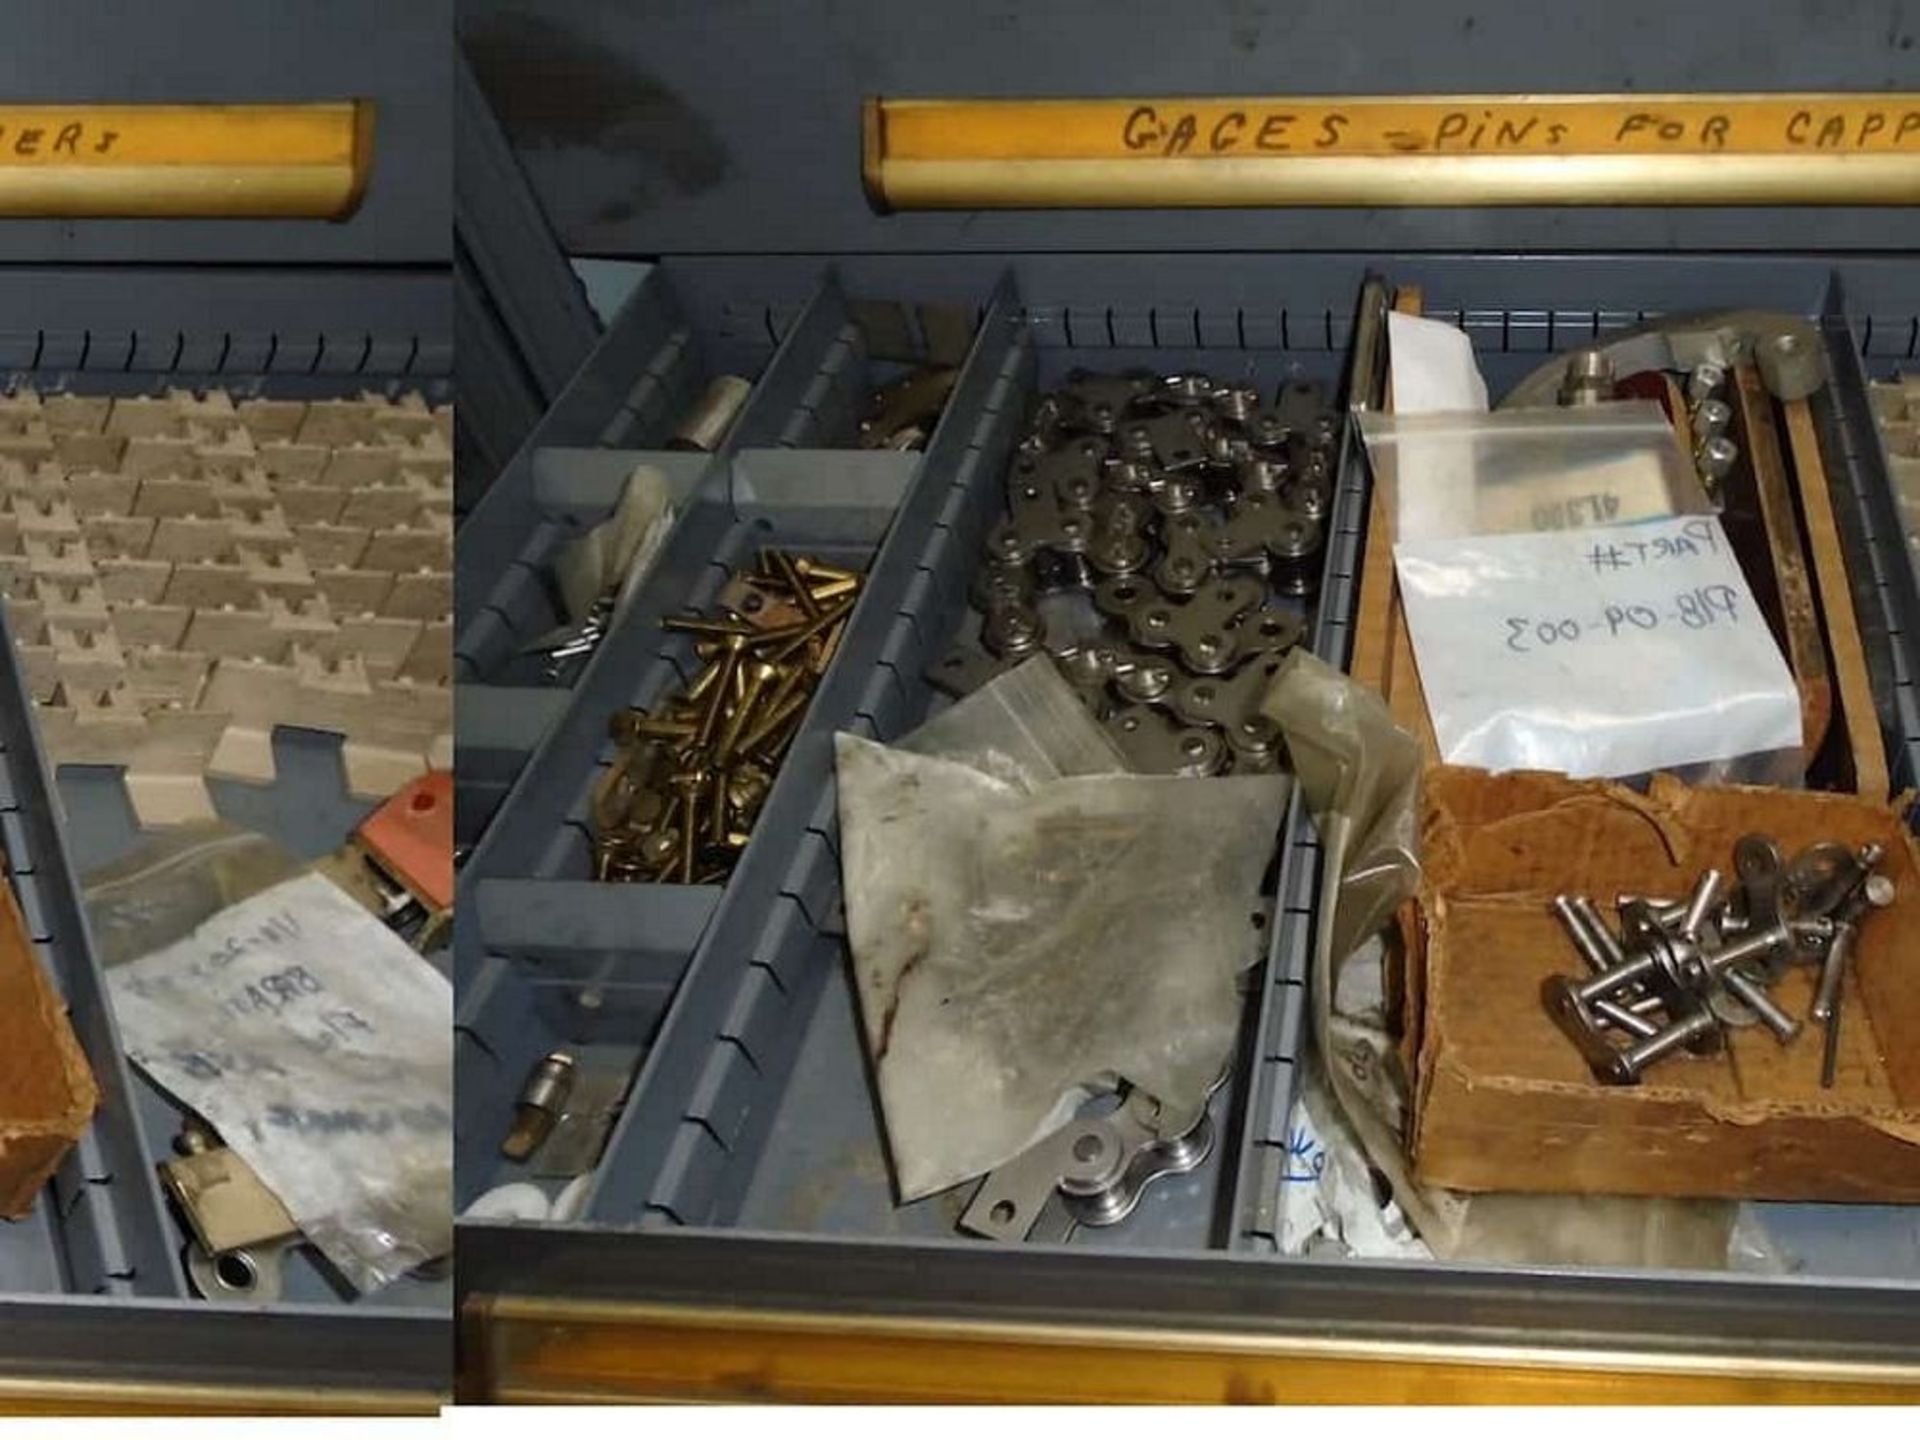 Shelves w/ drawers and contents ( O-rings, Cappers pins, Sprockets, Chain fittings, Capper belts, - Image 6 of 11